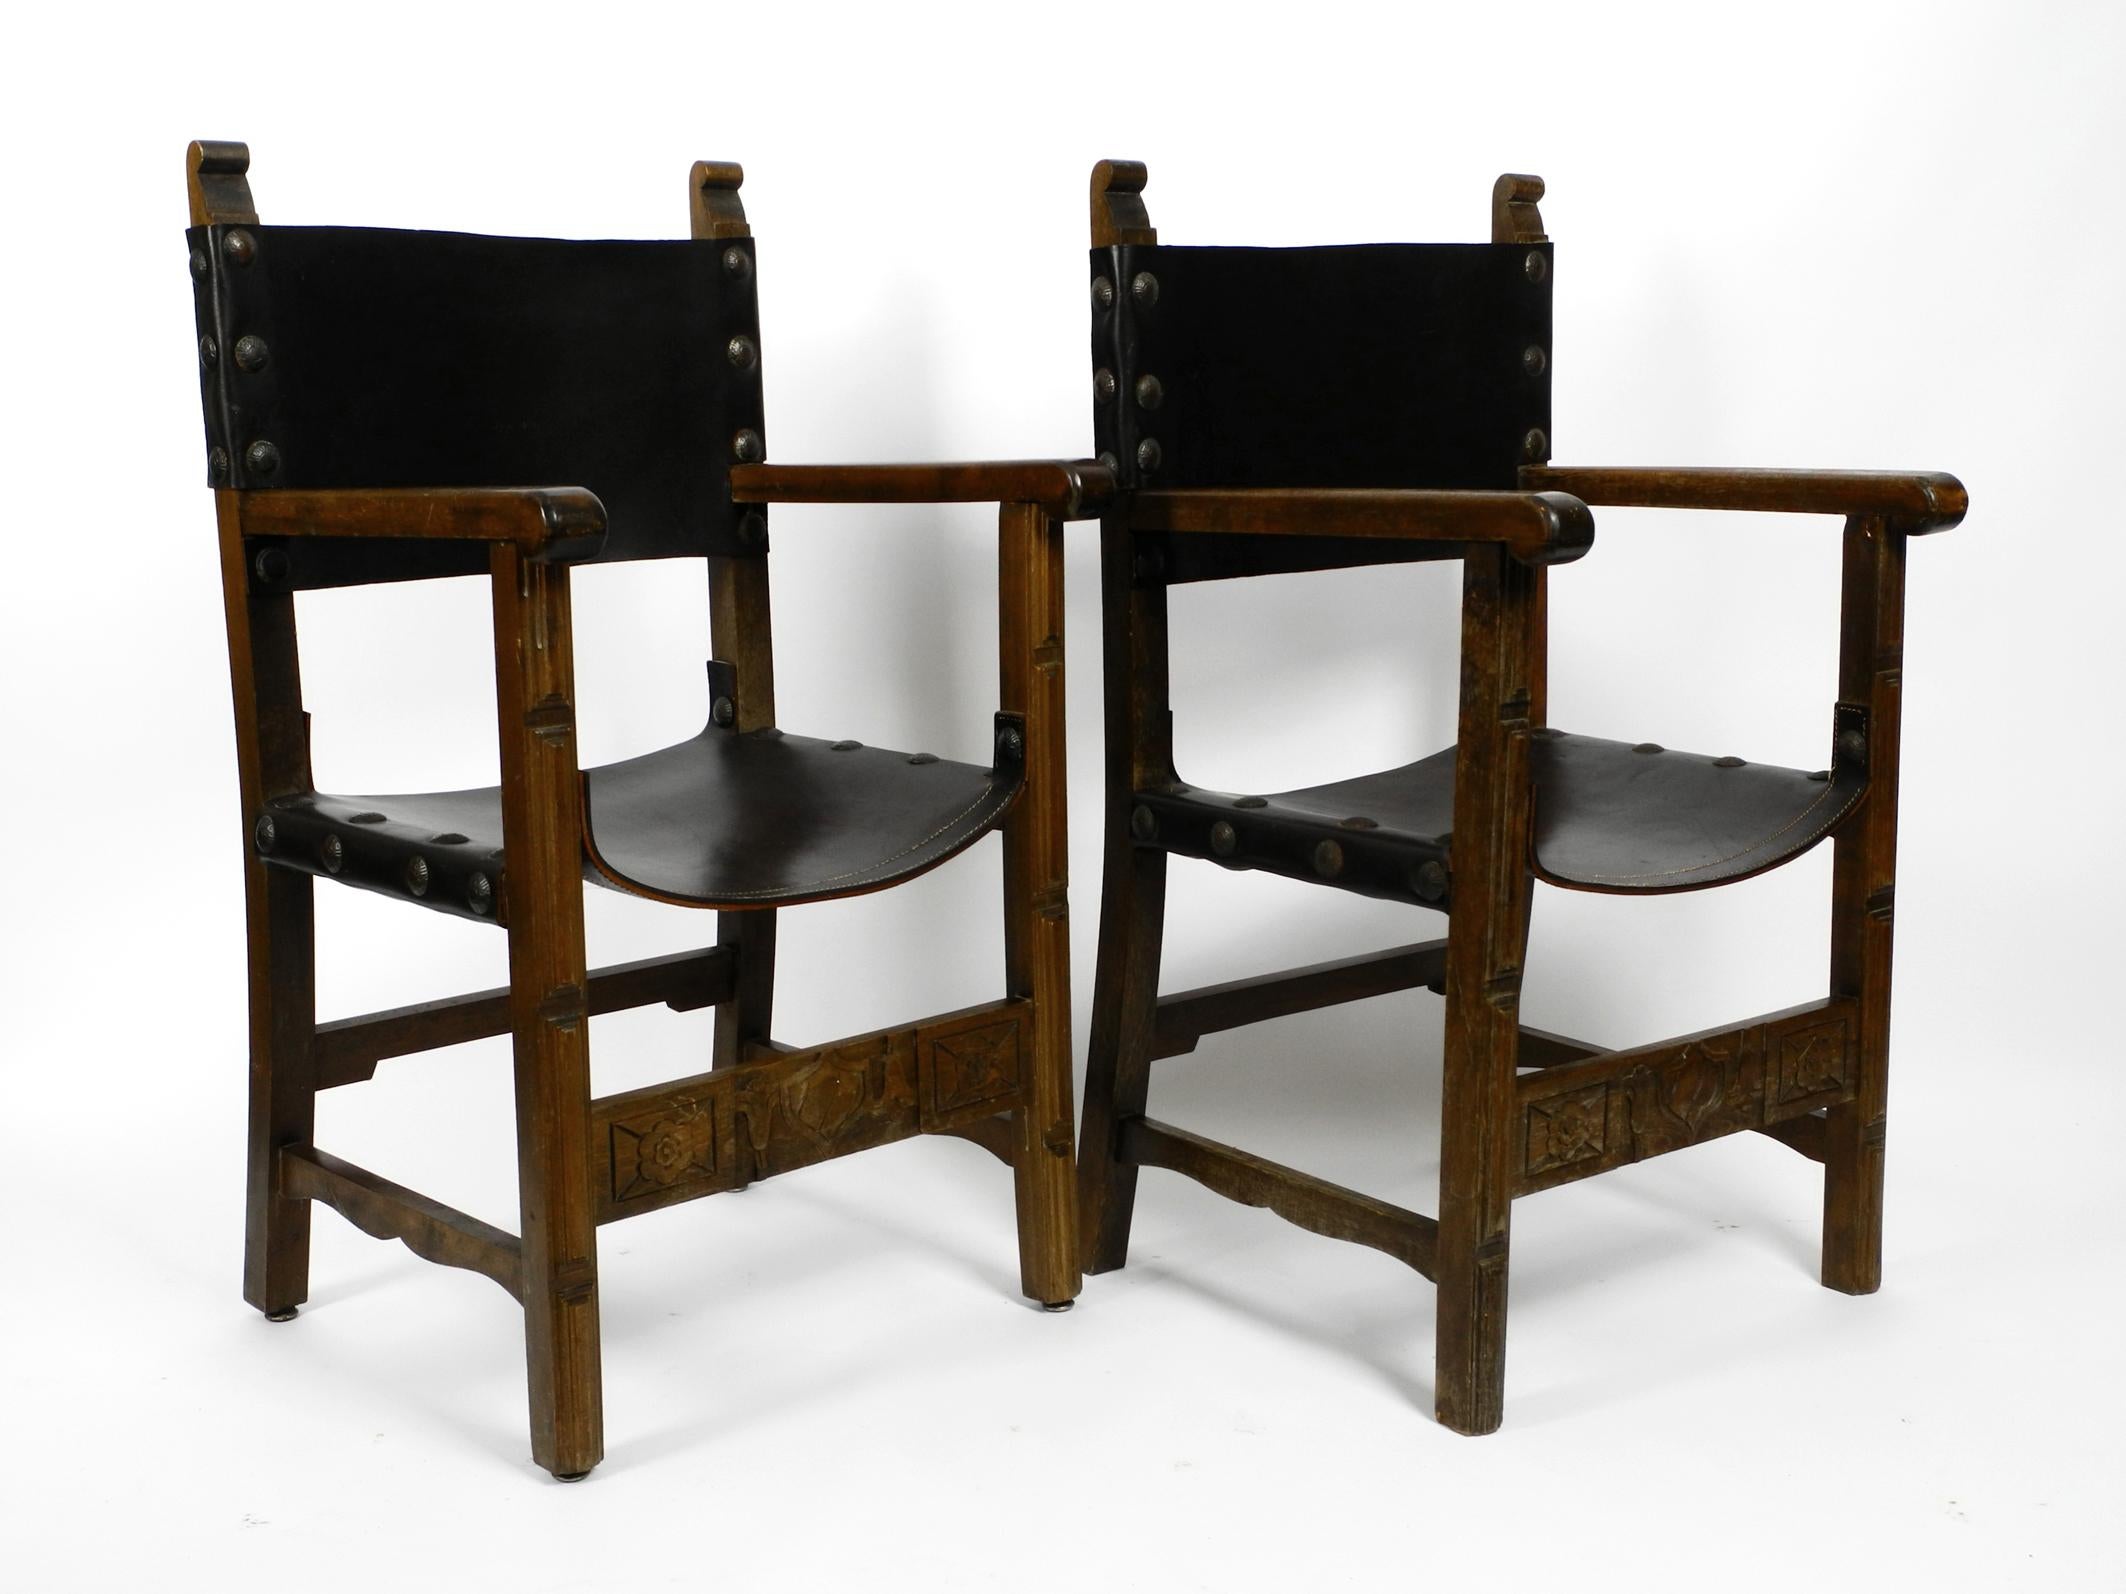 Two large 1930s massive knight armchairs made of solid wood. 
Seat and back are made of thick core leather. Made in Spain in the 1930's.
The previous owner bought it a long time ago in an antique shop in Spain.
The wooden frame, built to last,